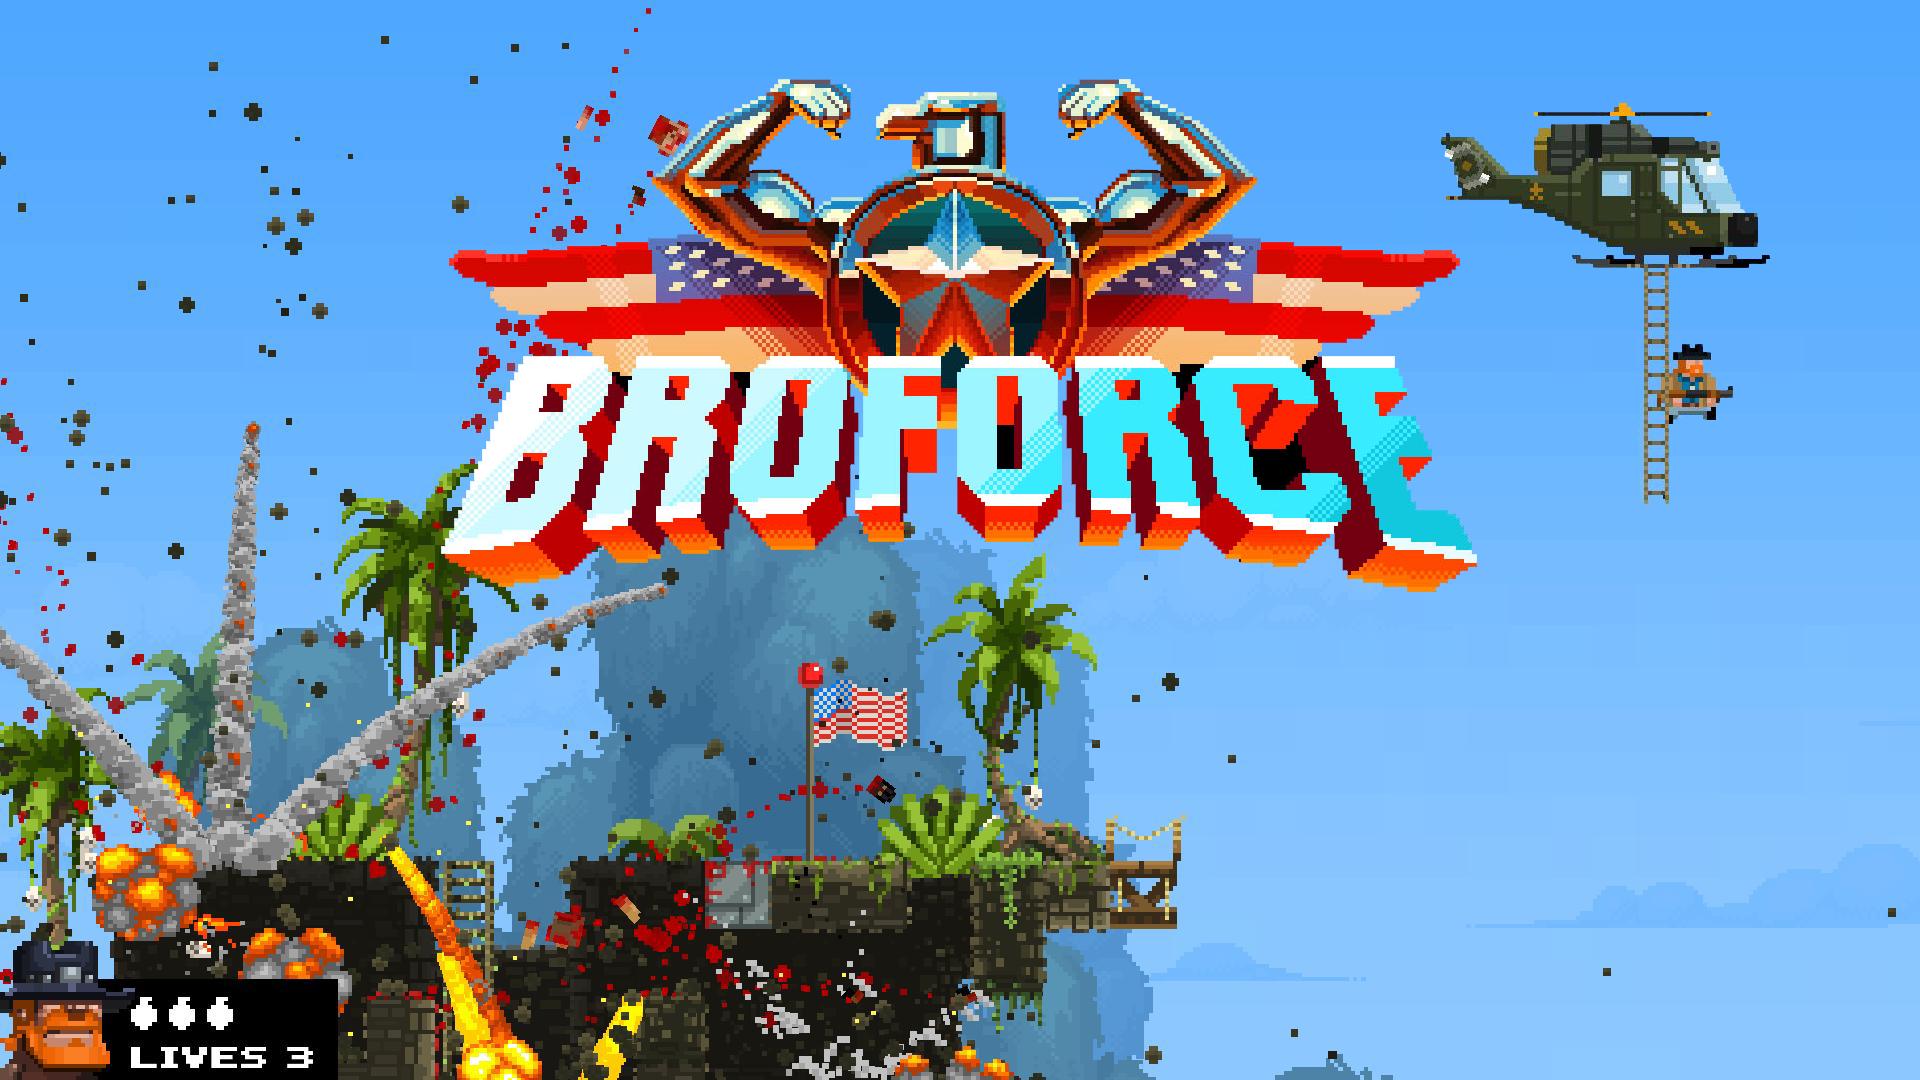 I Made This With Screenshots From The Pc Game Broforce